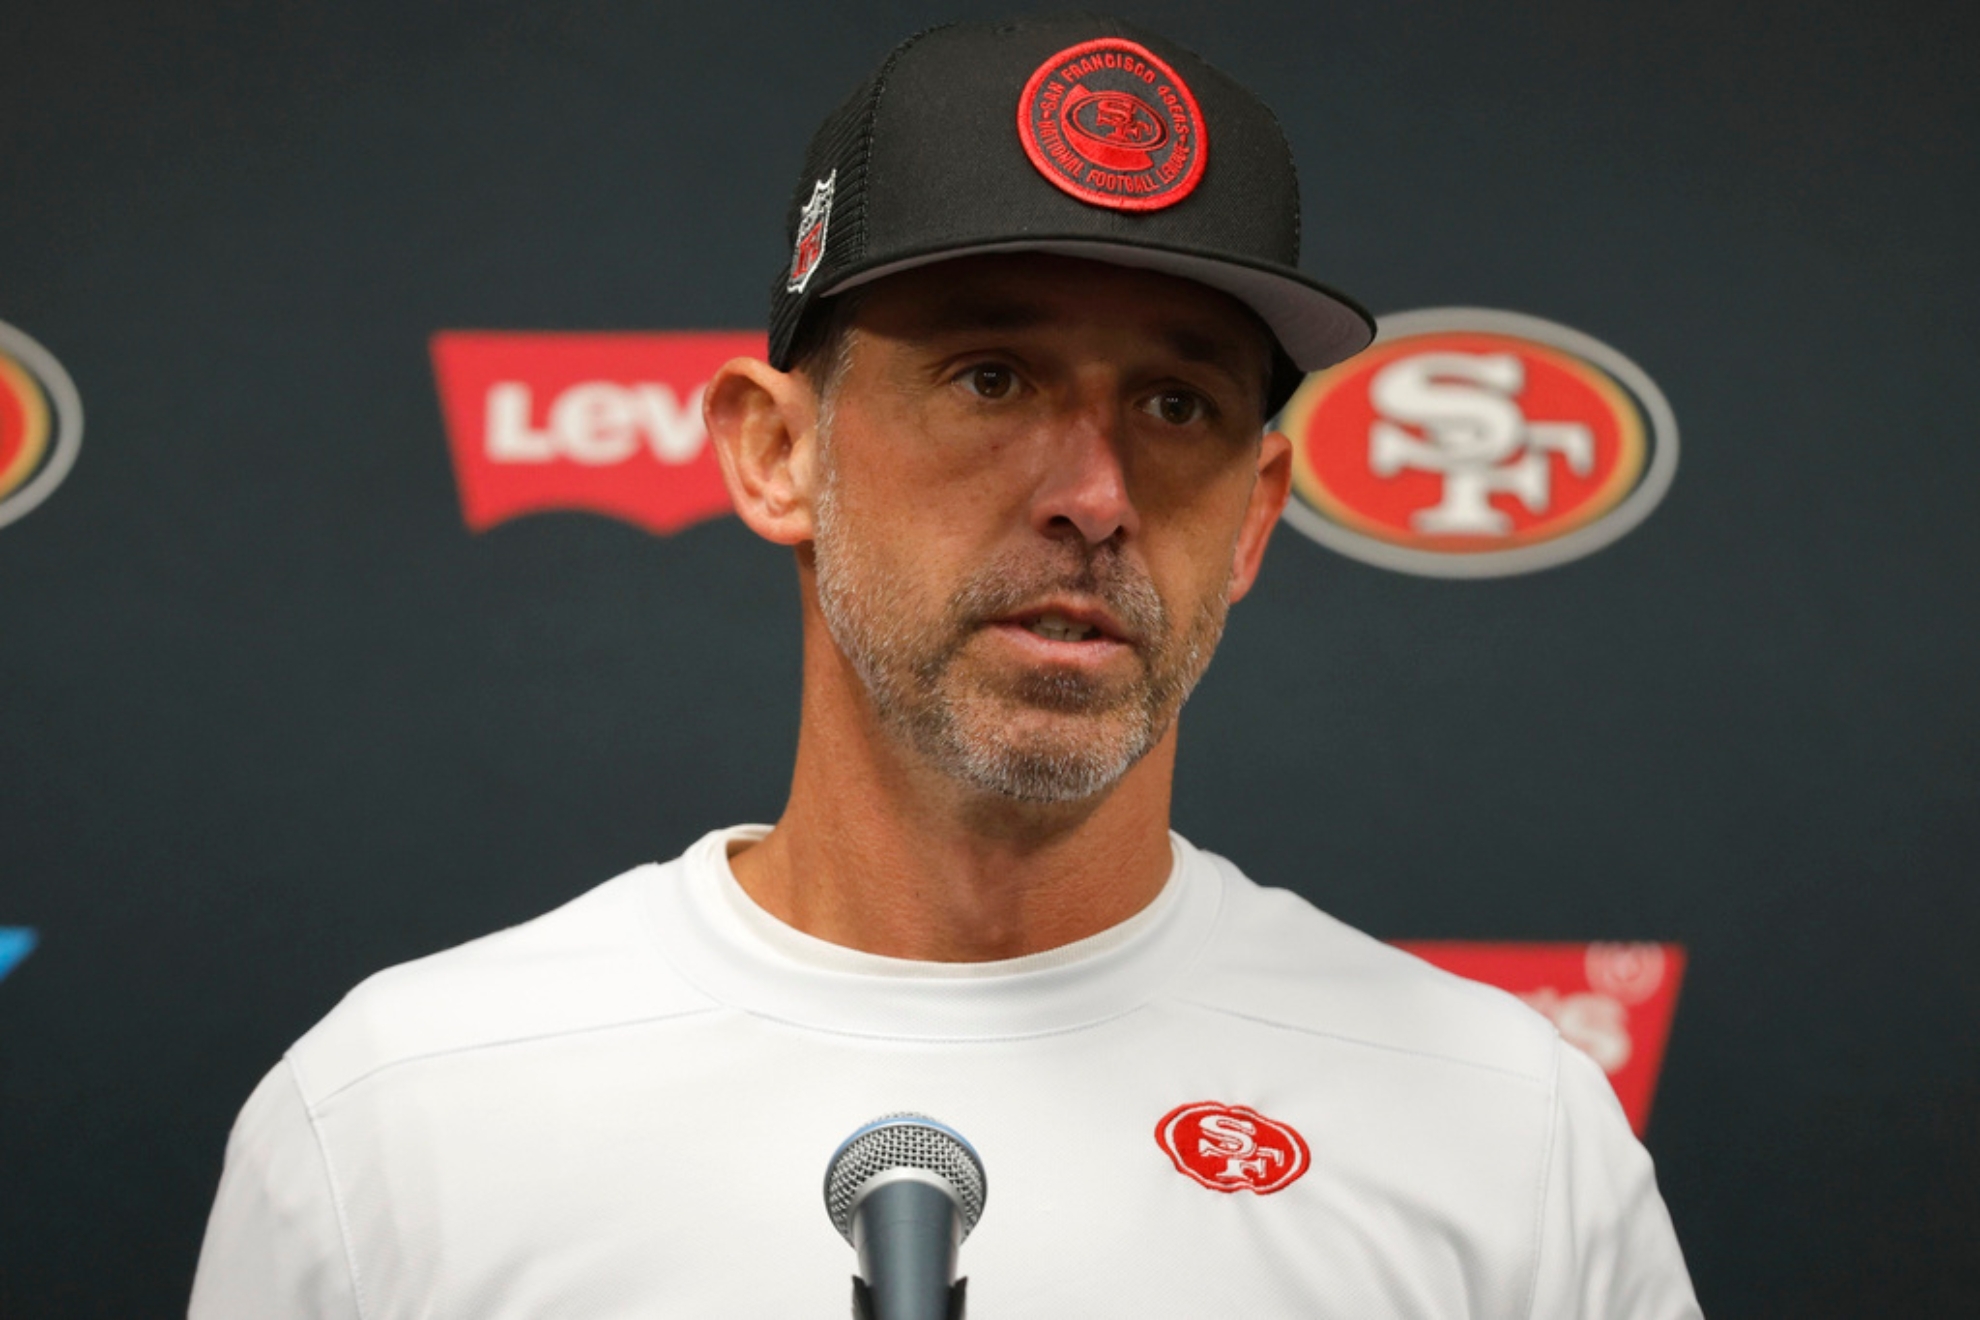 Shanahan will have to fix the Niners slump